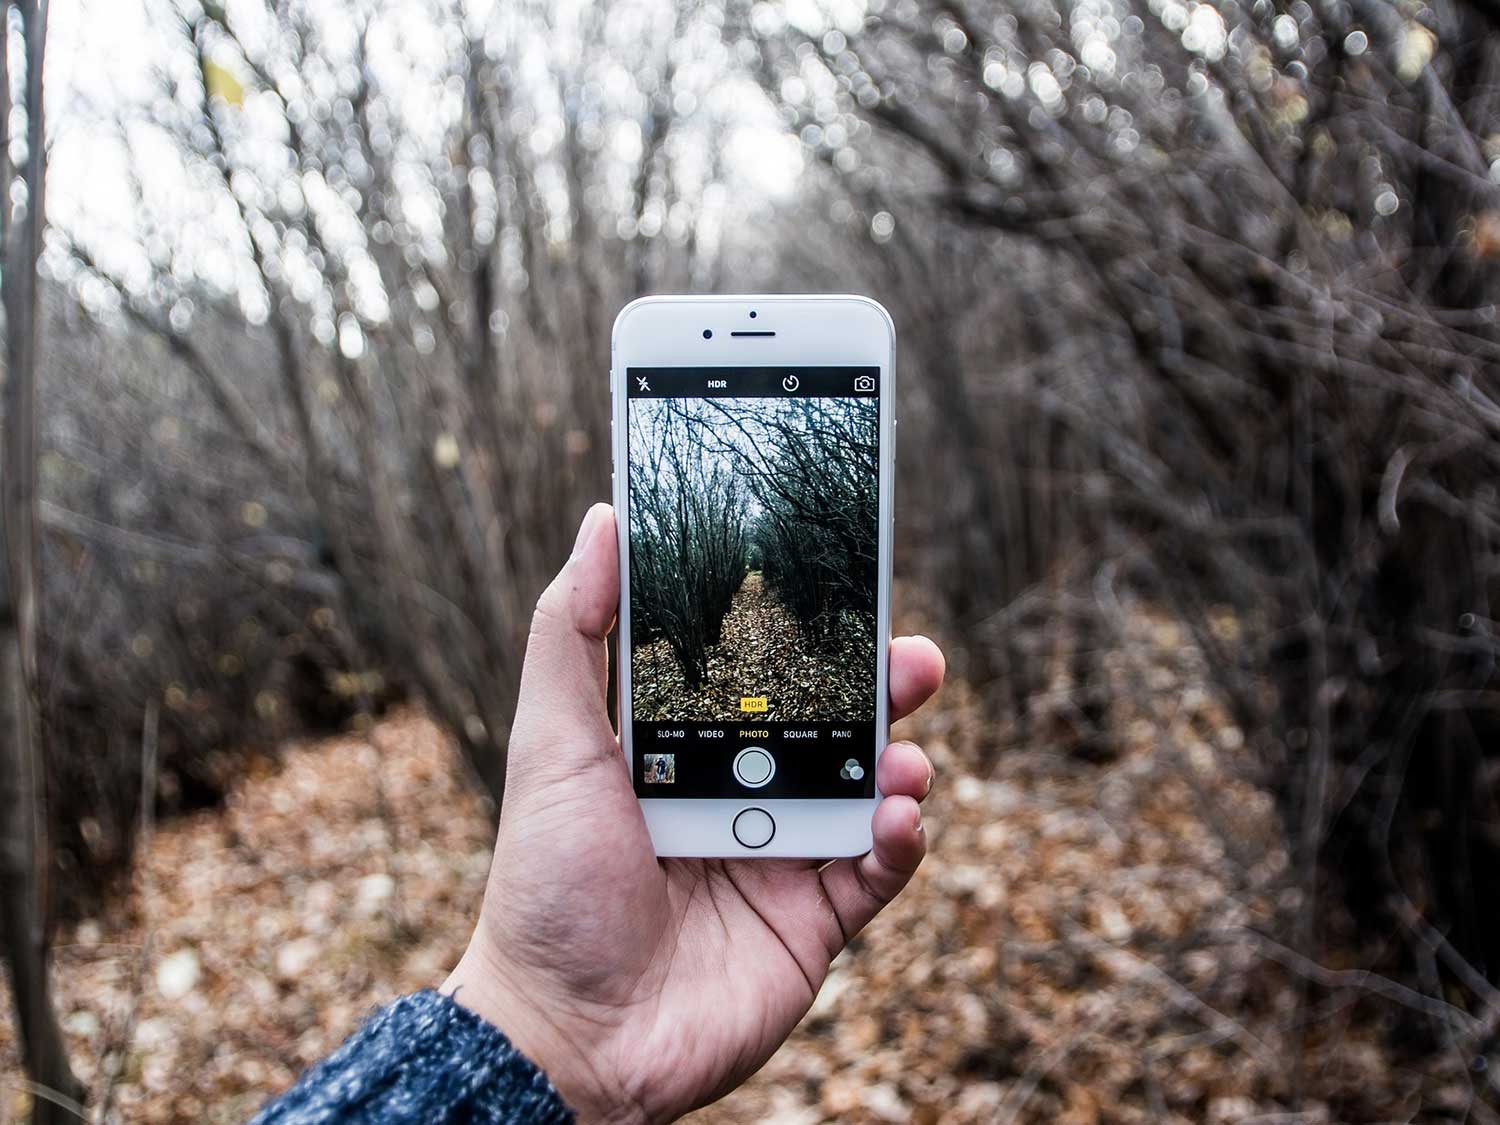 Hand holding a smartphone in the woods.